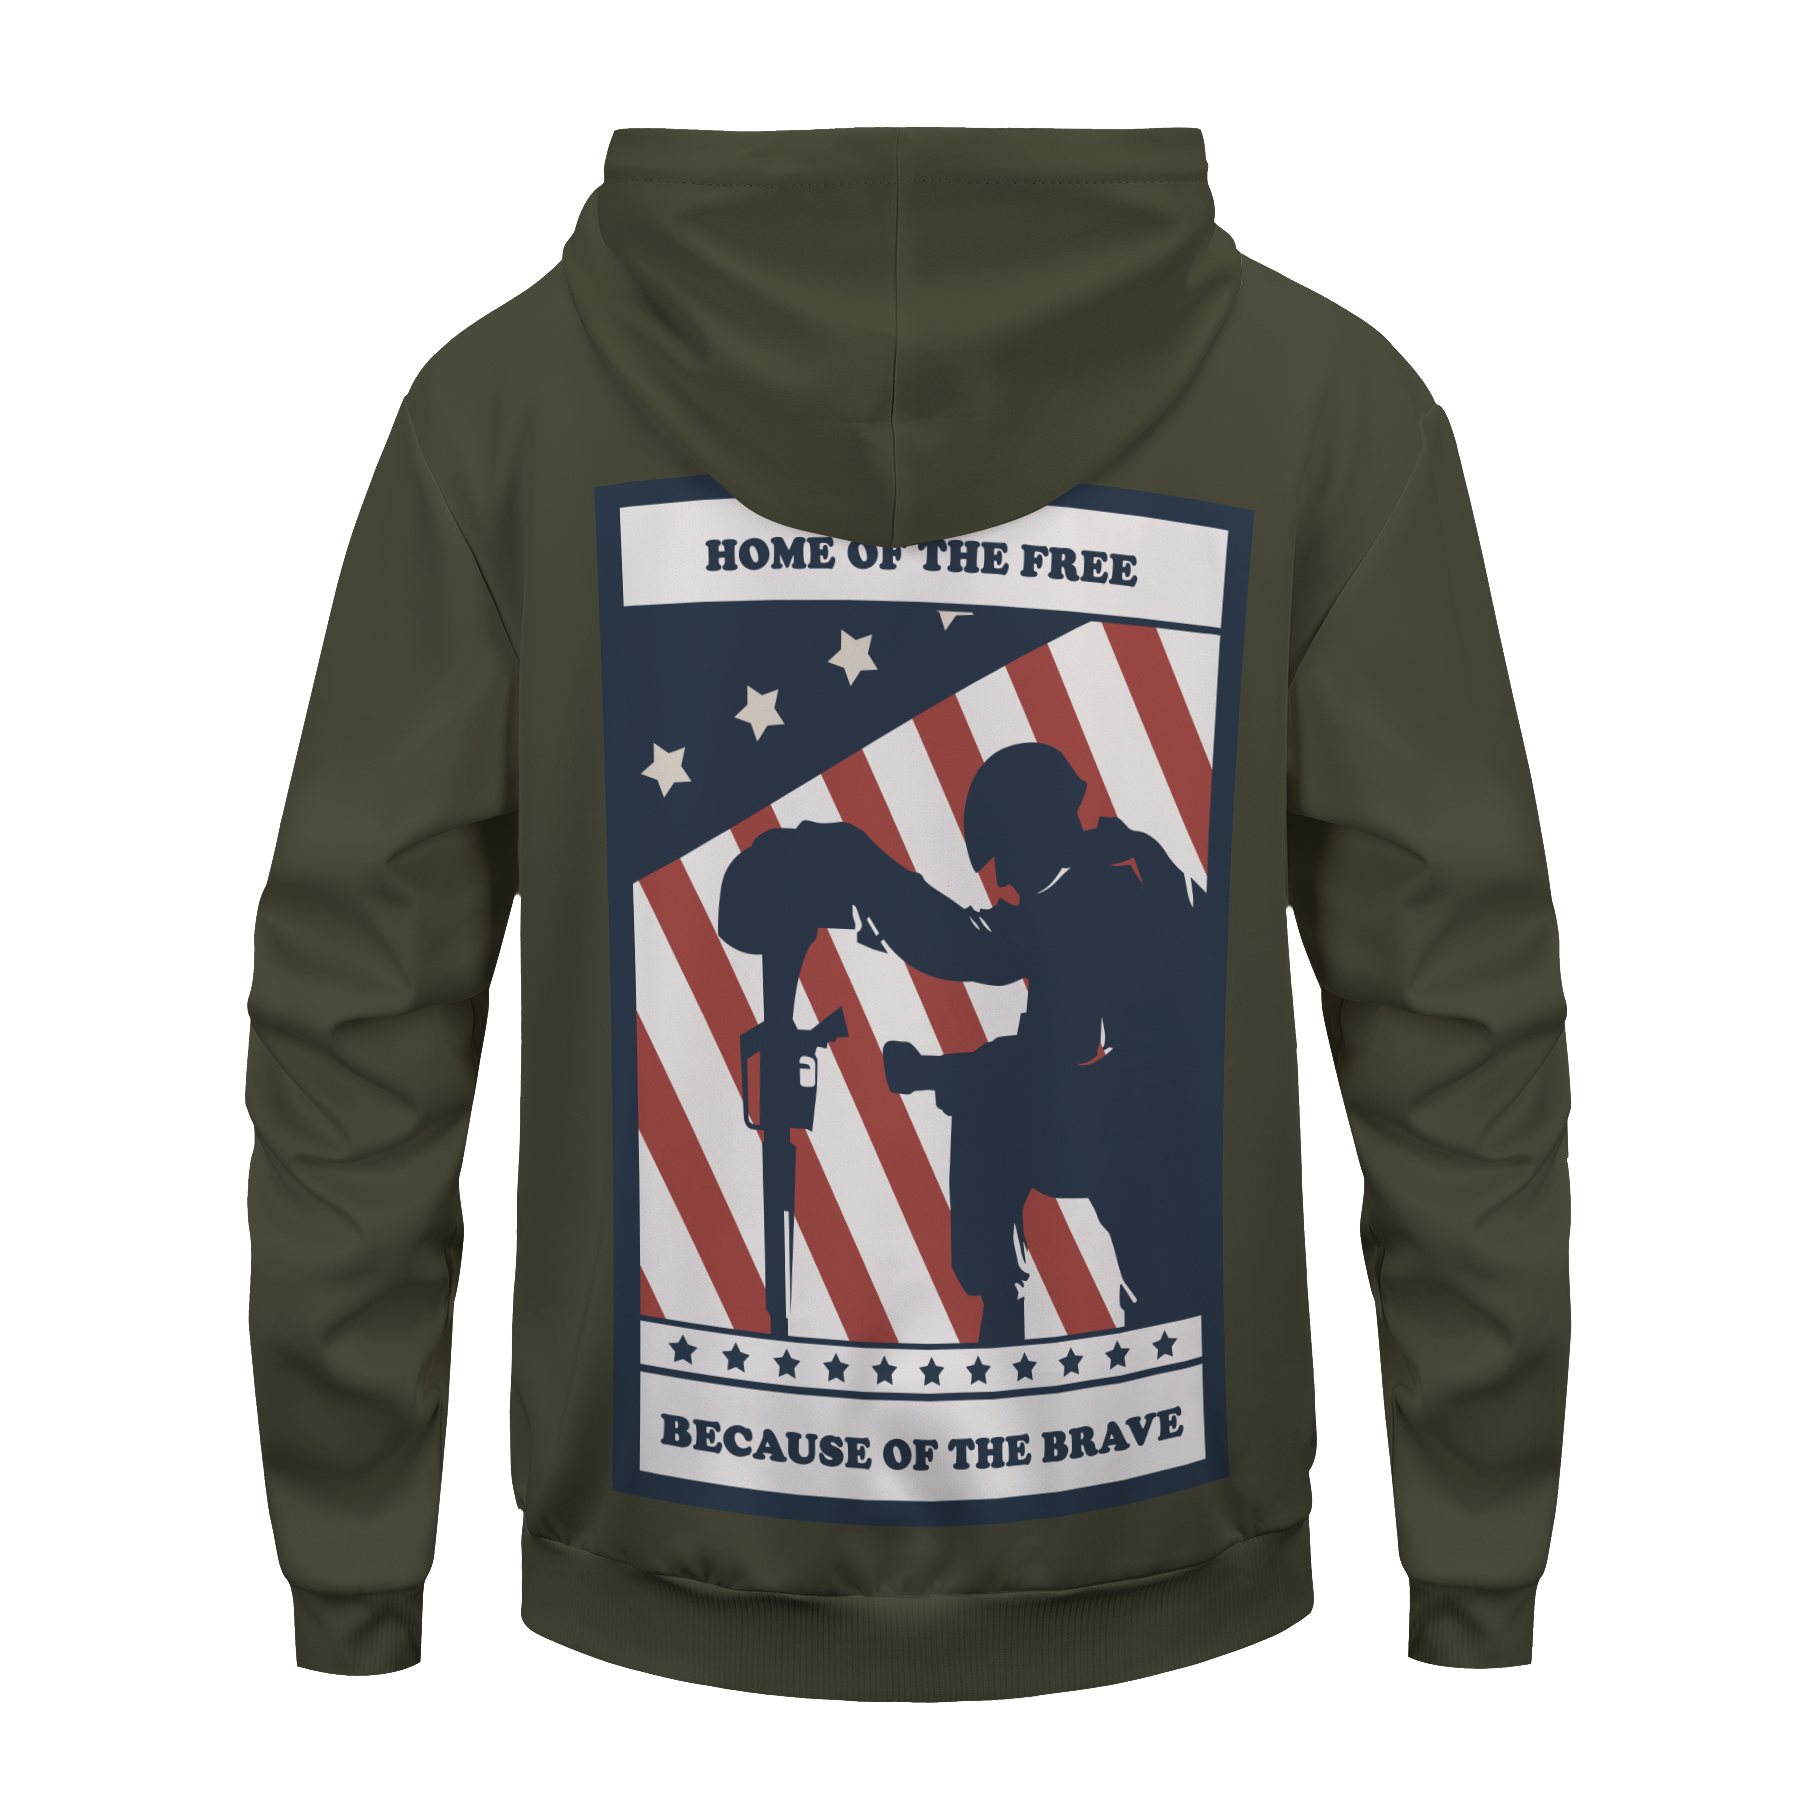 Home Of The Free Unisex Pullover Hoodie